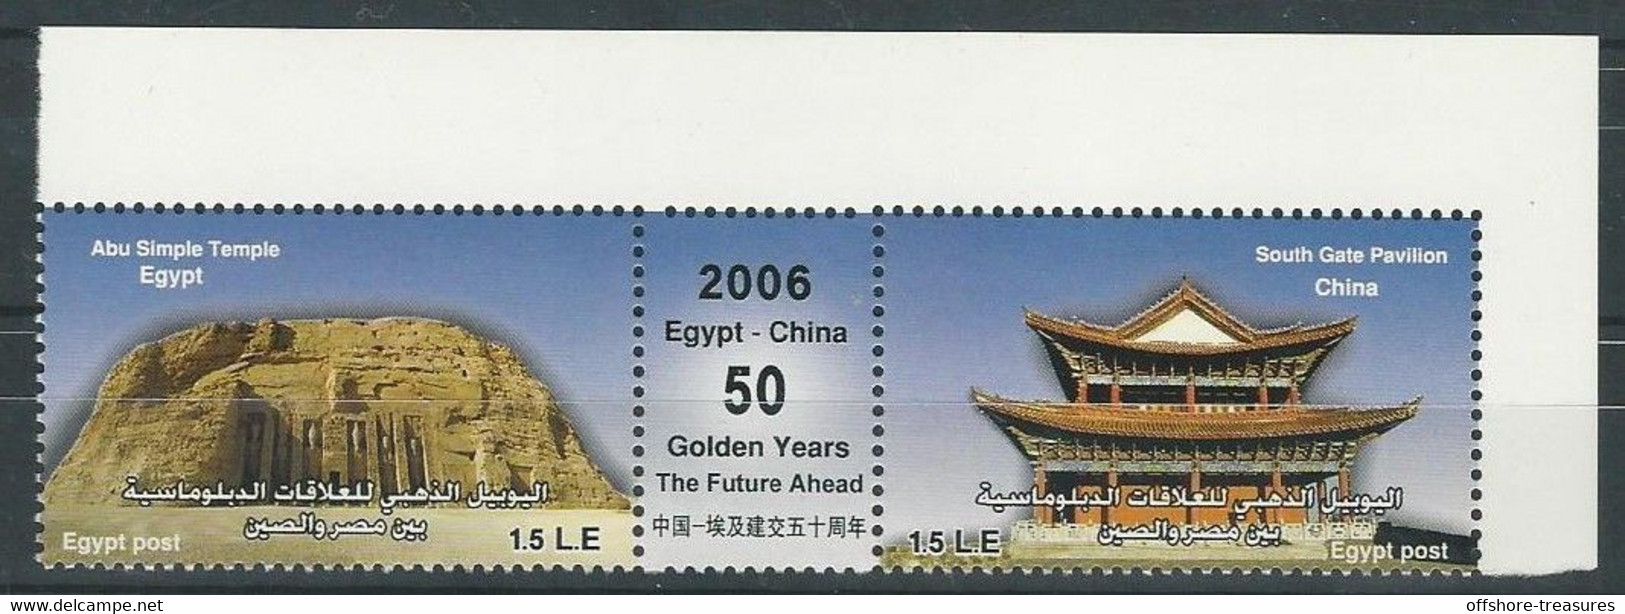 Egypt Stamp China 2006 Joint Issue - 50th Anniversary Of Egypt - China Diplomatic Relations - Margin Strip /Stamps - Nuevos